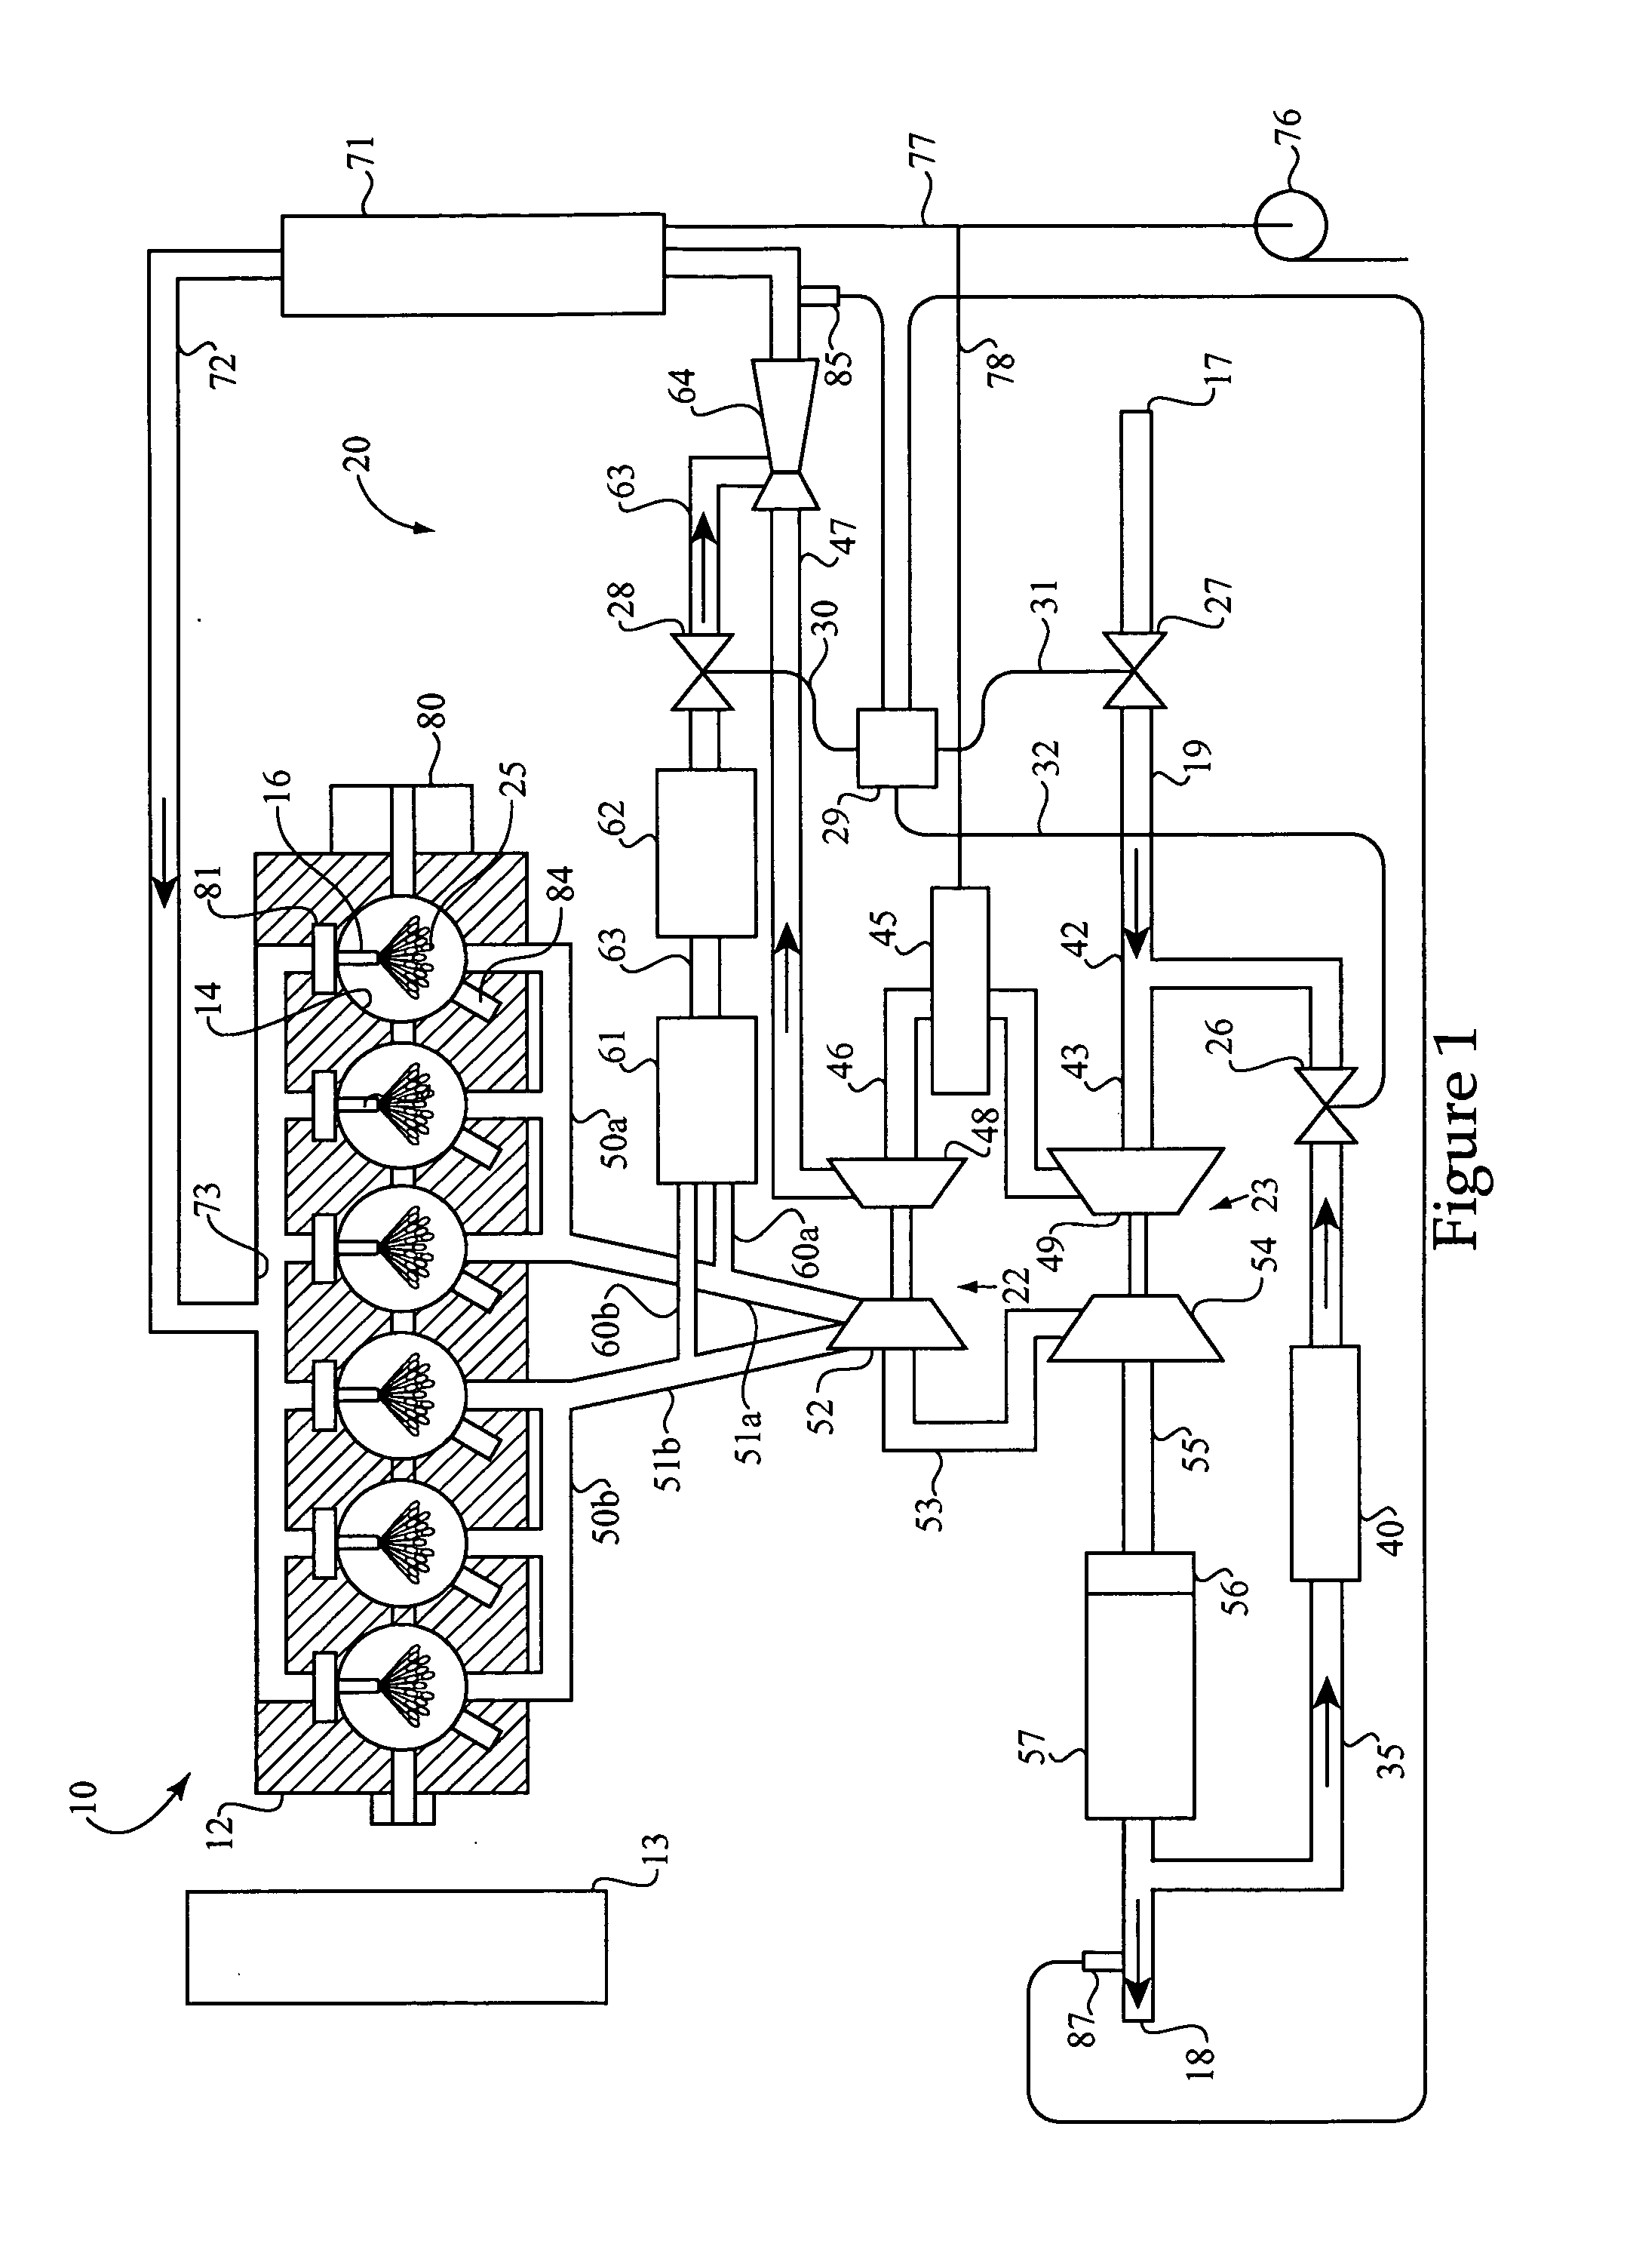 Combustion balancing in a homogeneous charge compression ignition engine